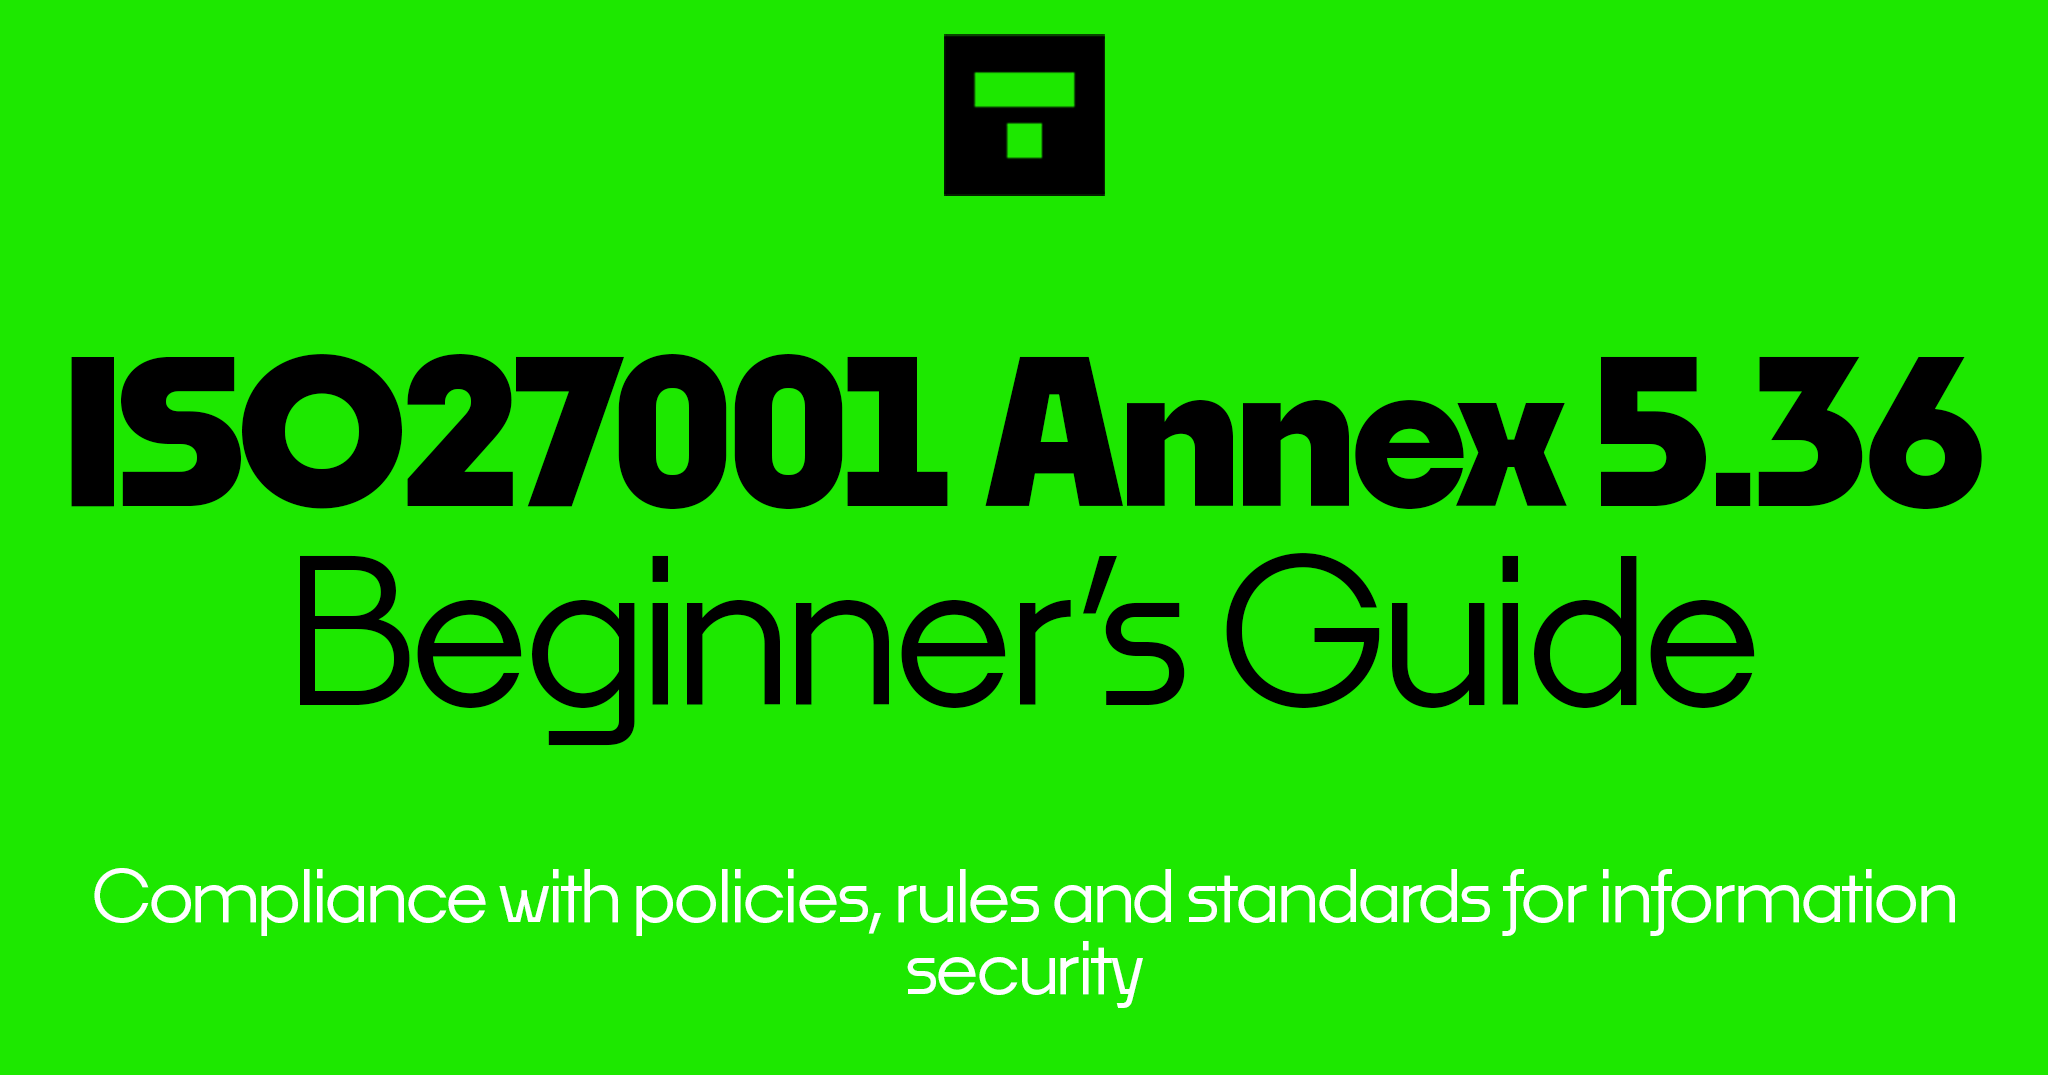 How To Implement ISO 27001 Annex A 5.36 Compliance With Policies, Rules And Standards For Information Security